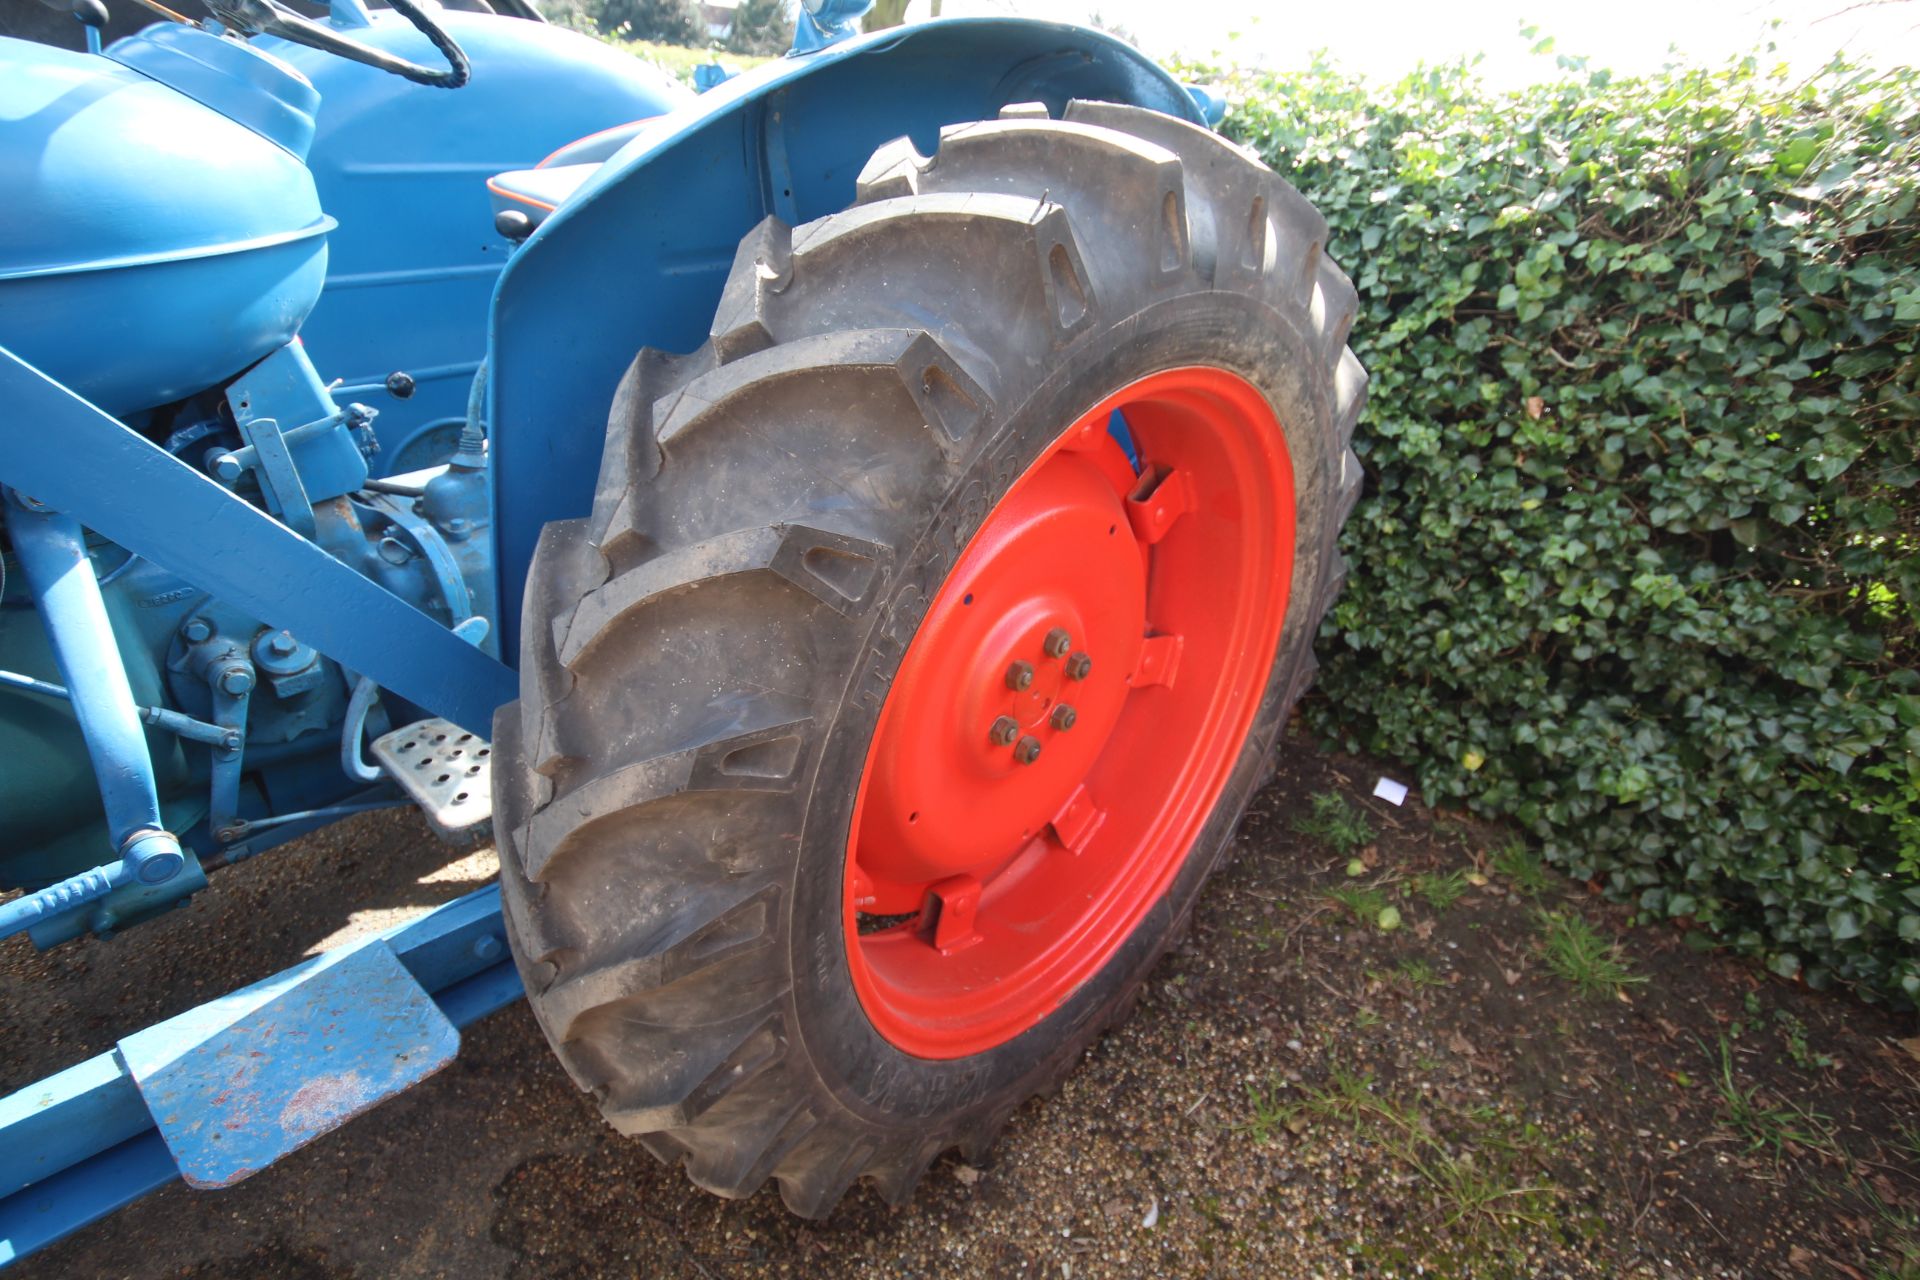 Fordson Power Major 2WD tractor. Registration 708 GUR (no paperwork). 12.4-36 rear wheels and - Image 19 of 54